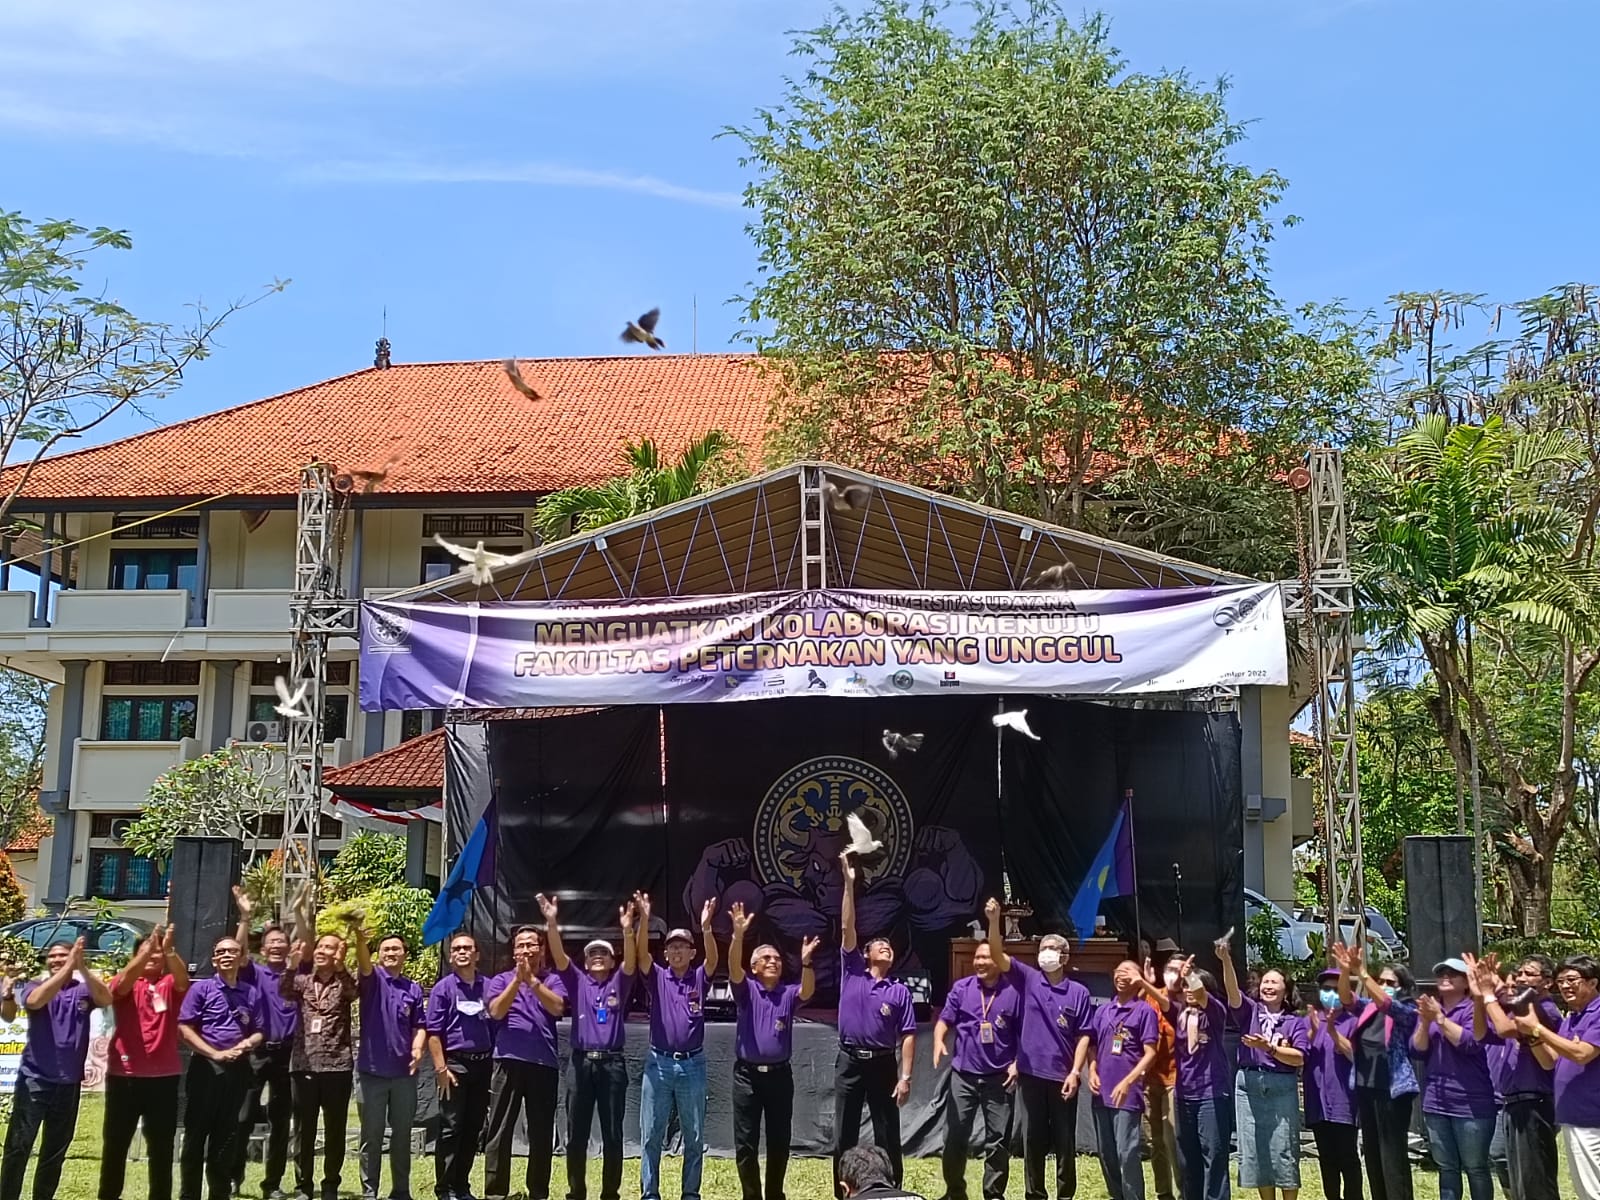 Celebration of the 60th Anniversary of the 60th Anniversary of the Faculty of Animal Husbandry at Udayana University